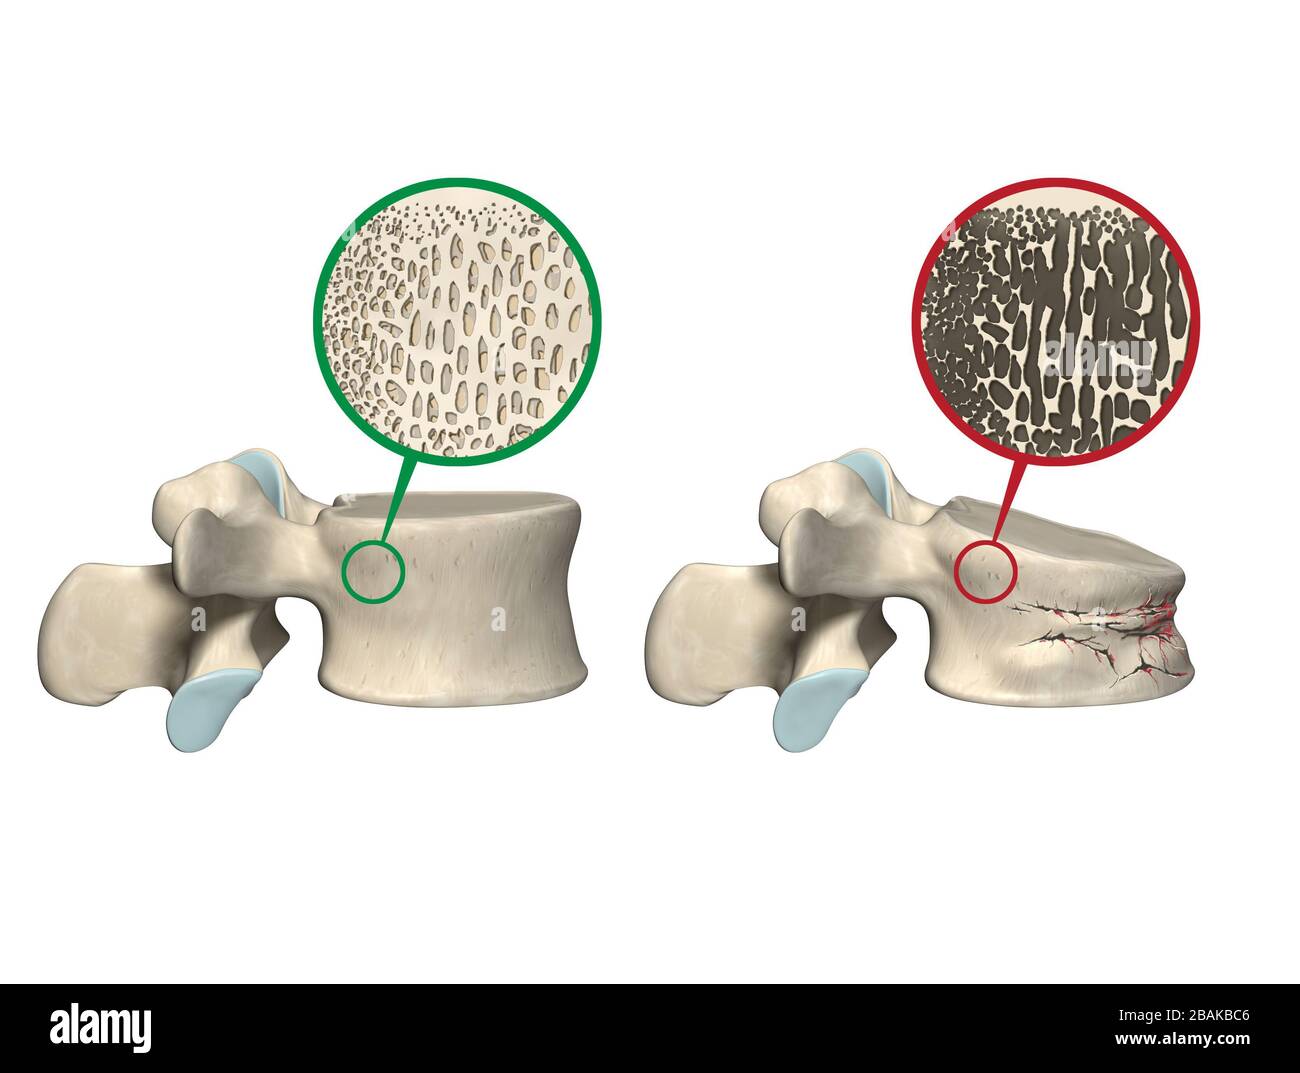 left: healthy vertebral body and normal bone matrix,  right: vertebral body with osteoporosis and crush fracture, 3D illustration Stock Photo